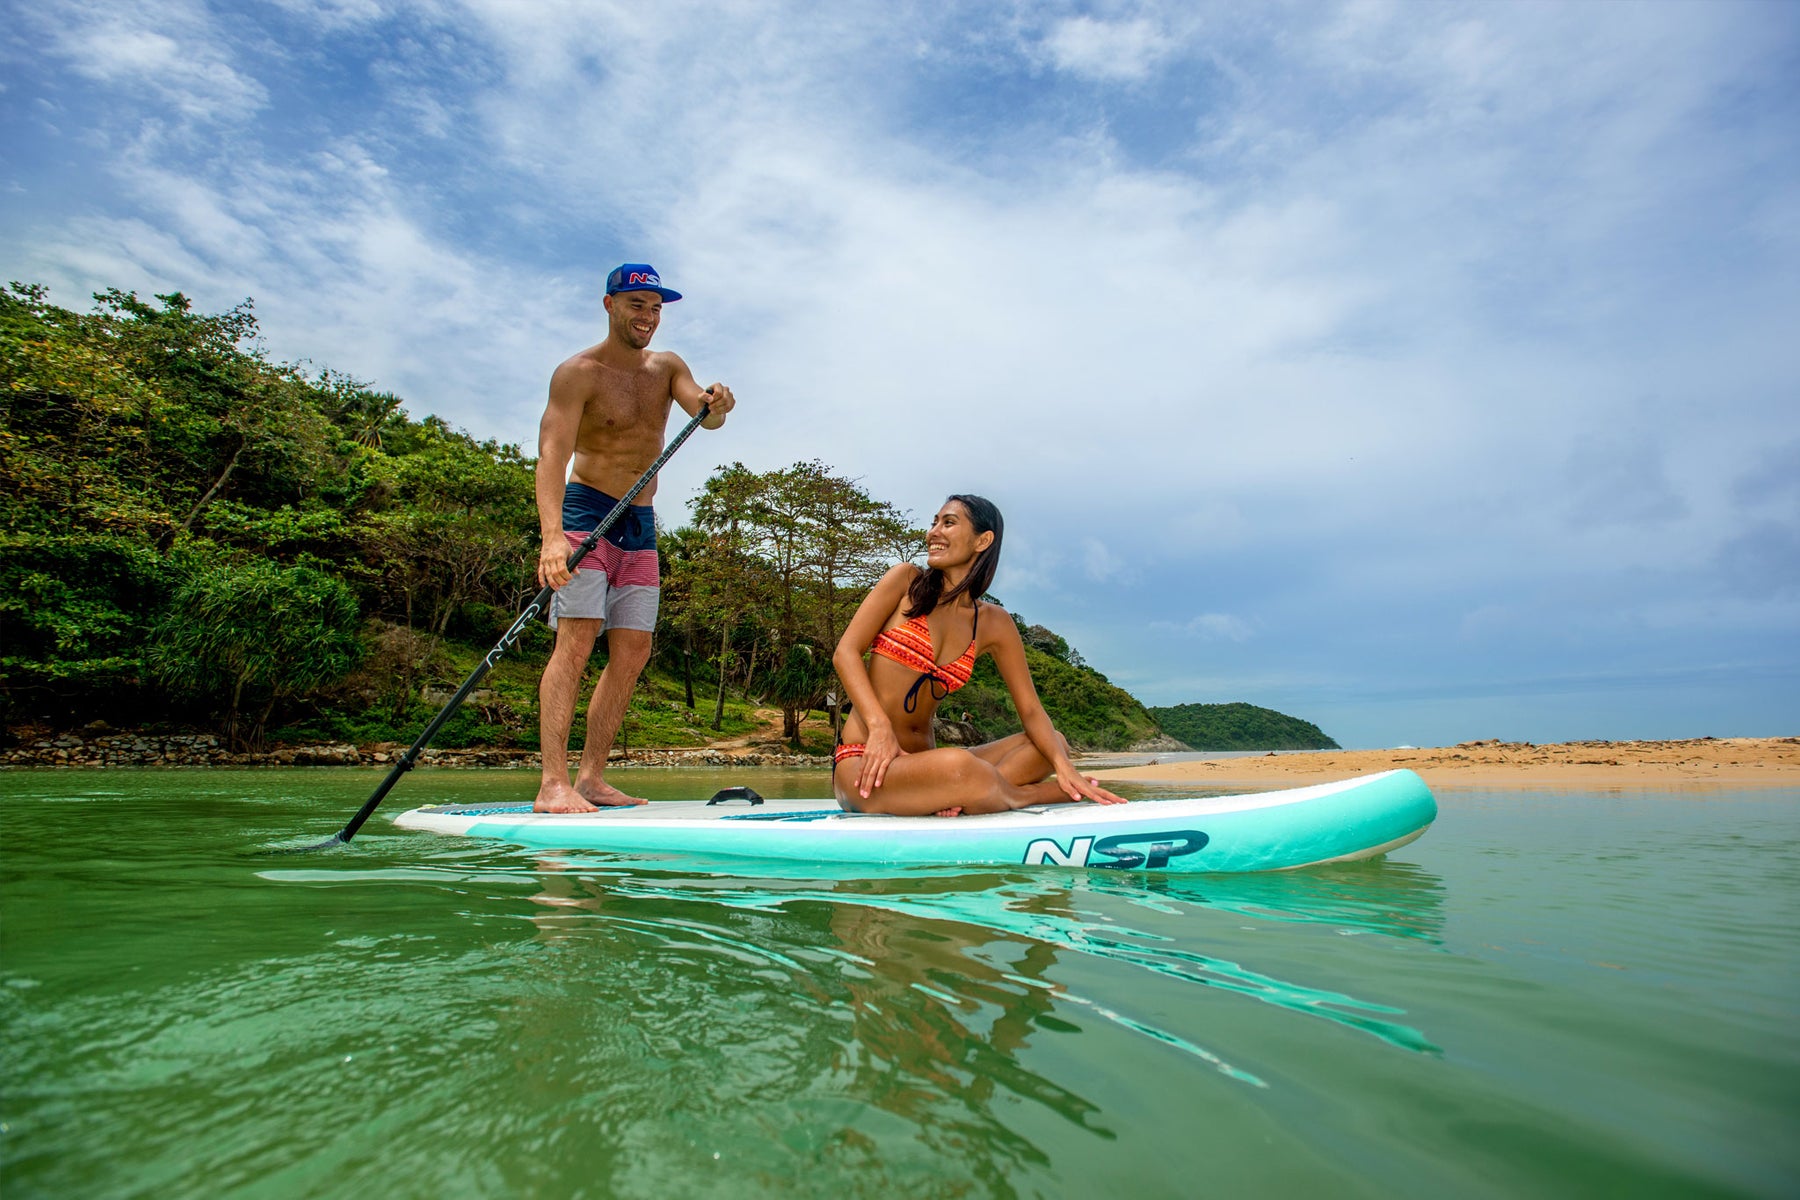 12 Performance Technique Tips for Stand Up Paddle (SUP) Boarders